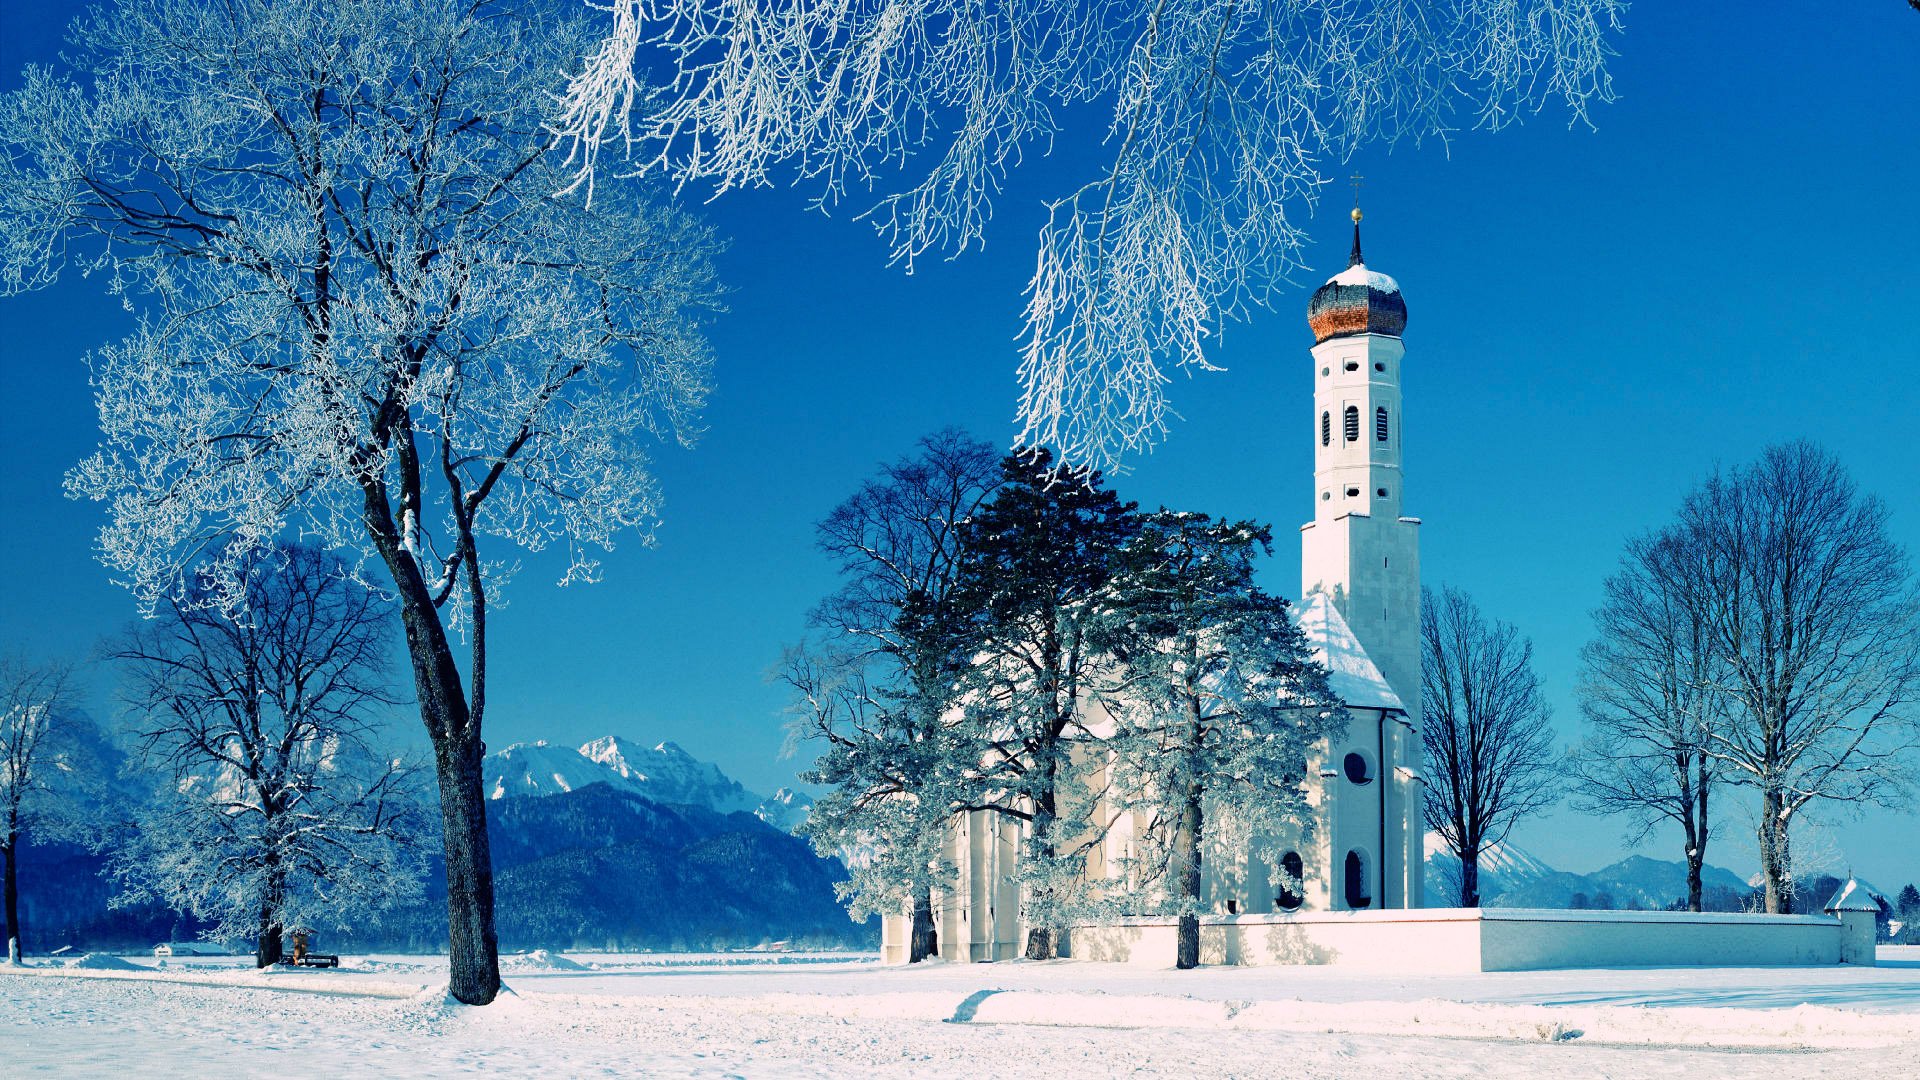  Blog Archive Beautiful Christmas Wallpapers Mac Winter Day 1920x1080